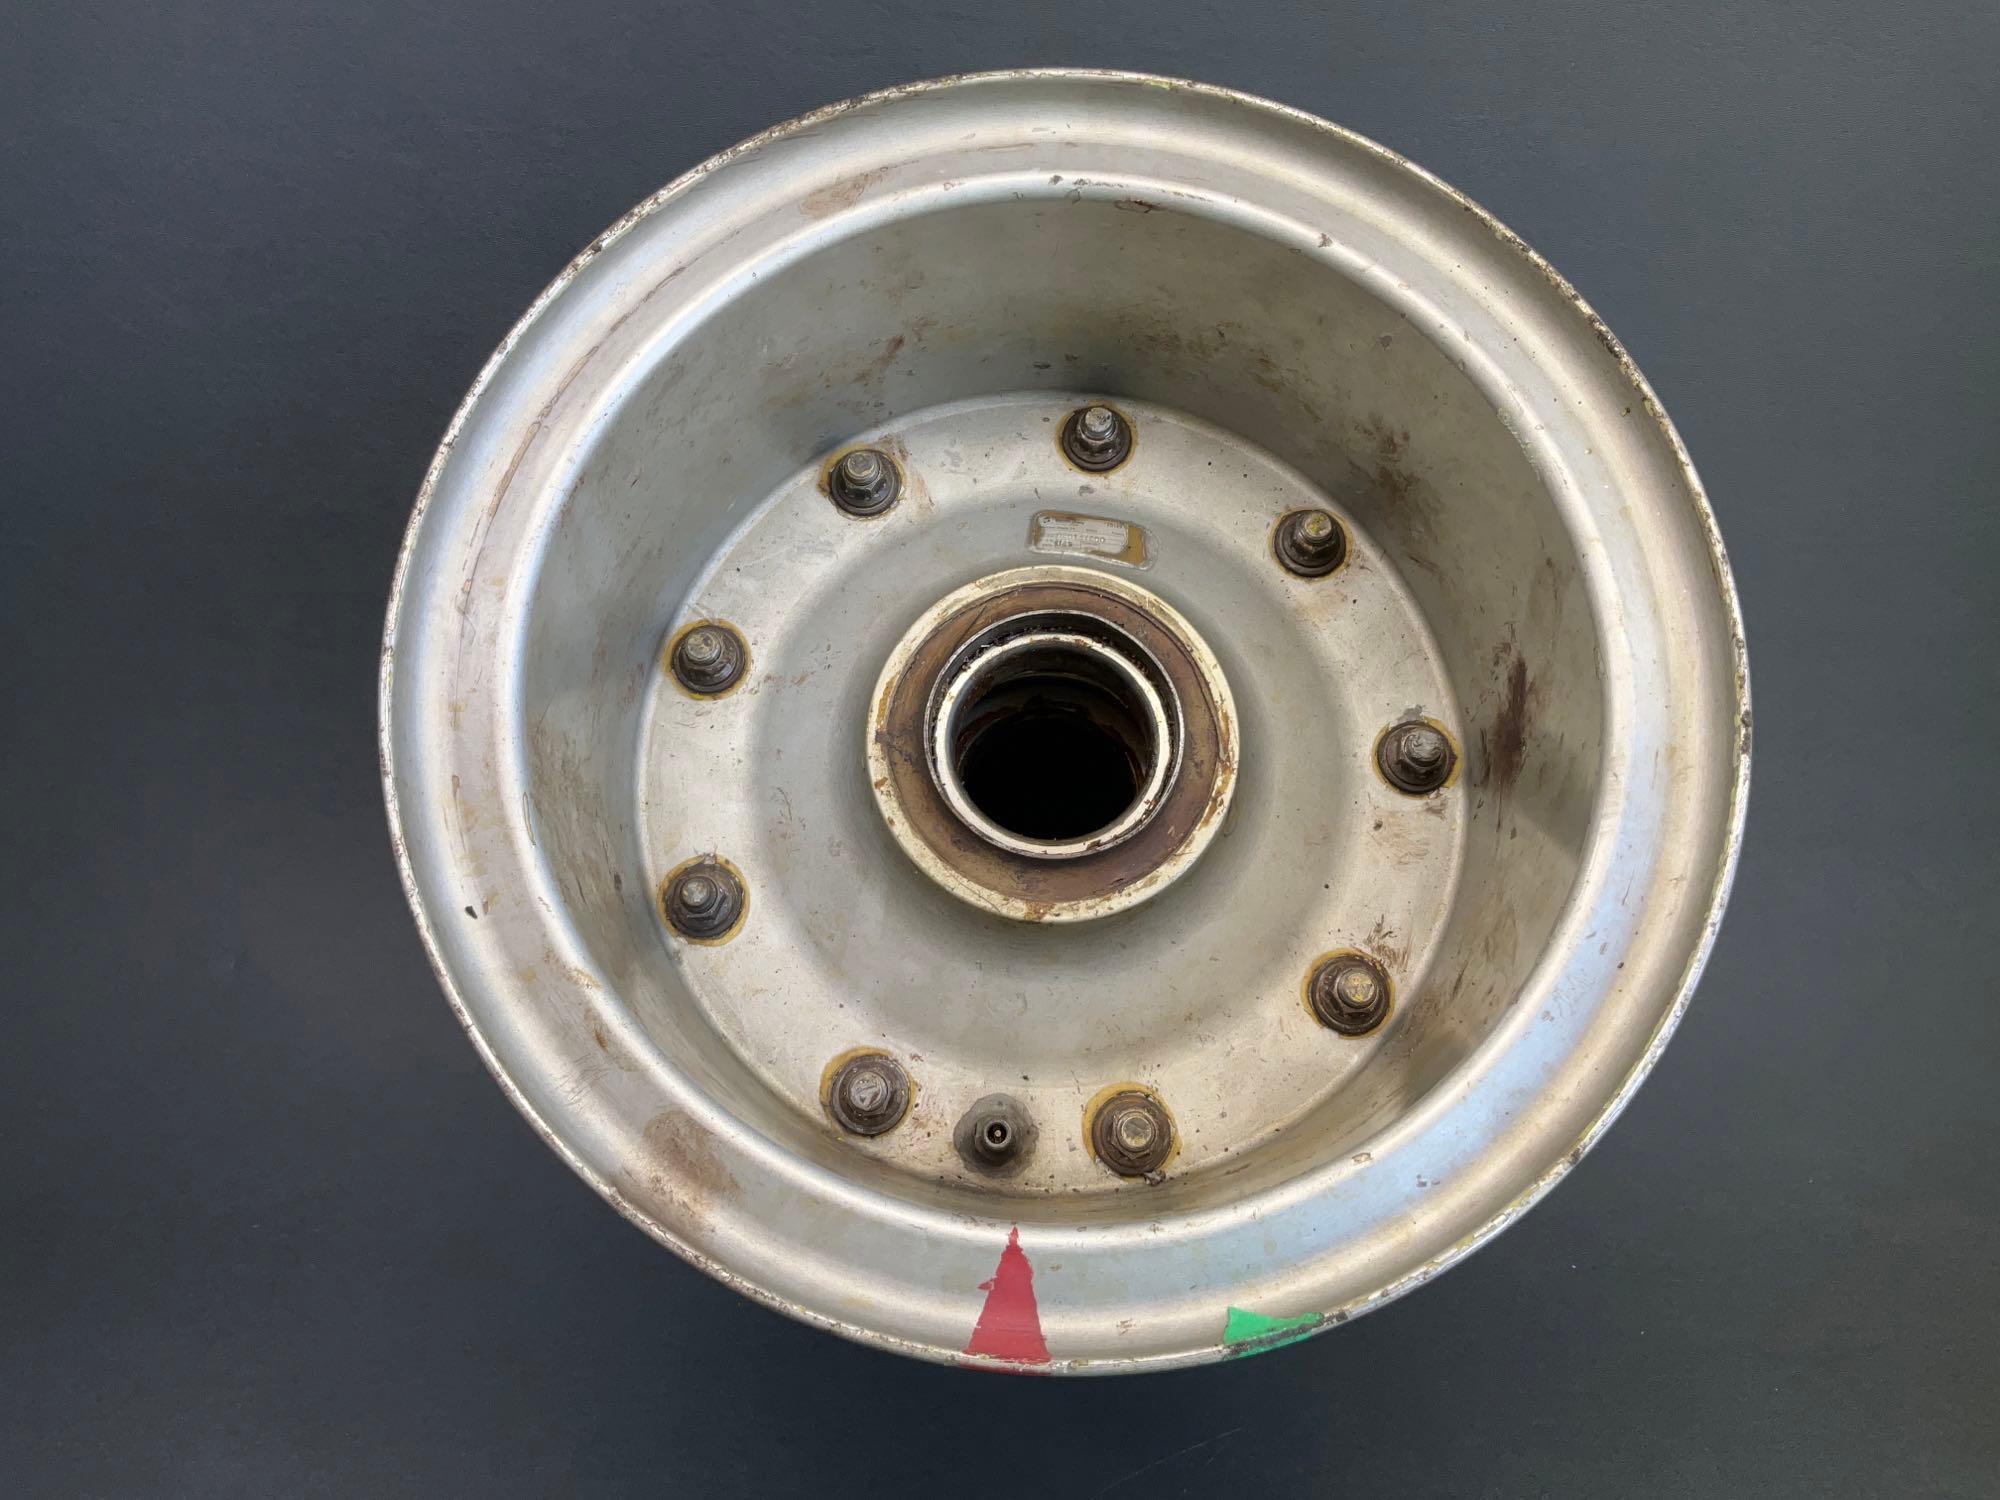 MAIN WHEEL ASSYS C20147-200 (REMOVED FOR WEAR)